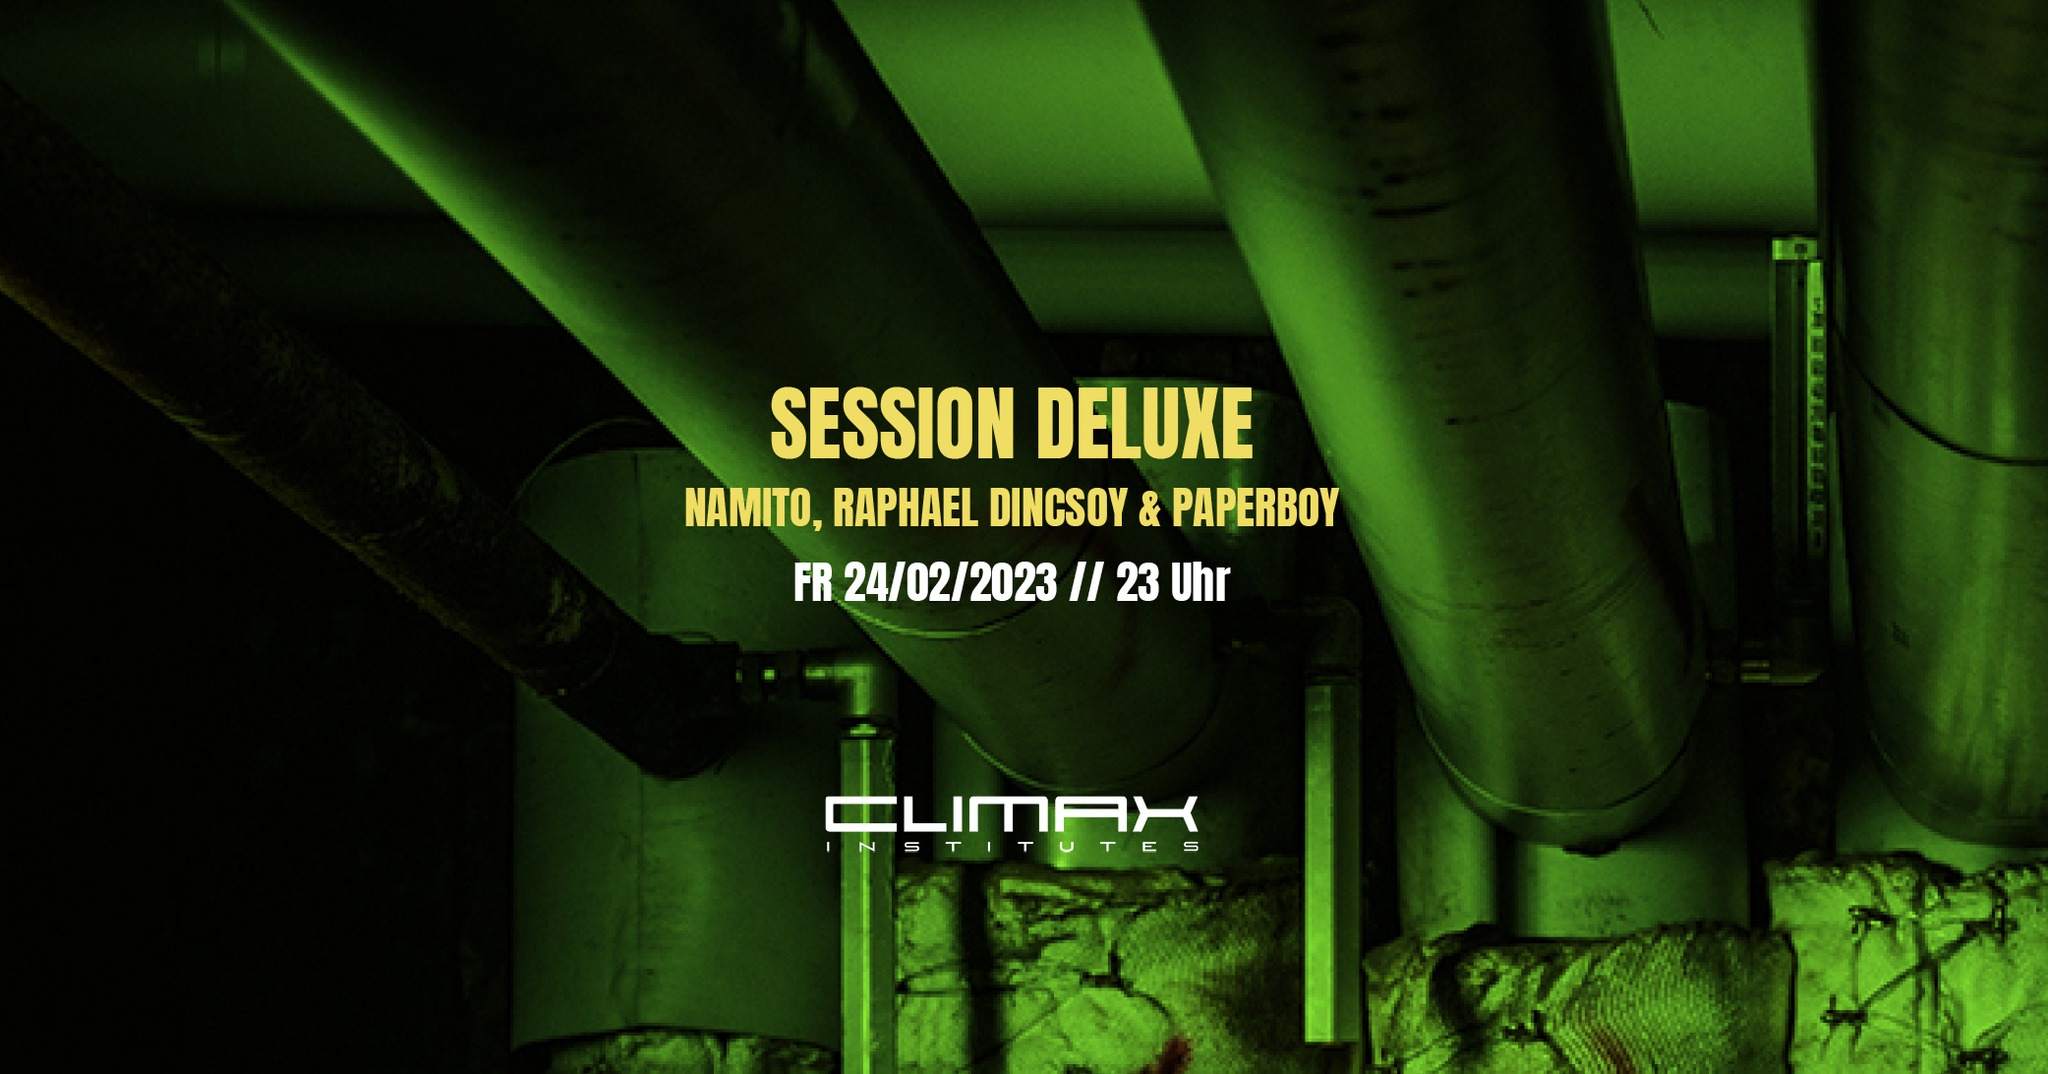 SESSION DELUXE pres. Namito, Raphael Dincsoy & PAPERBOY - フライヤー表